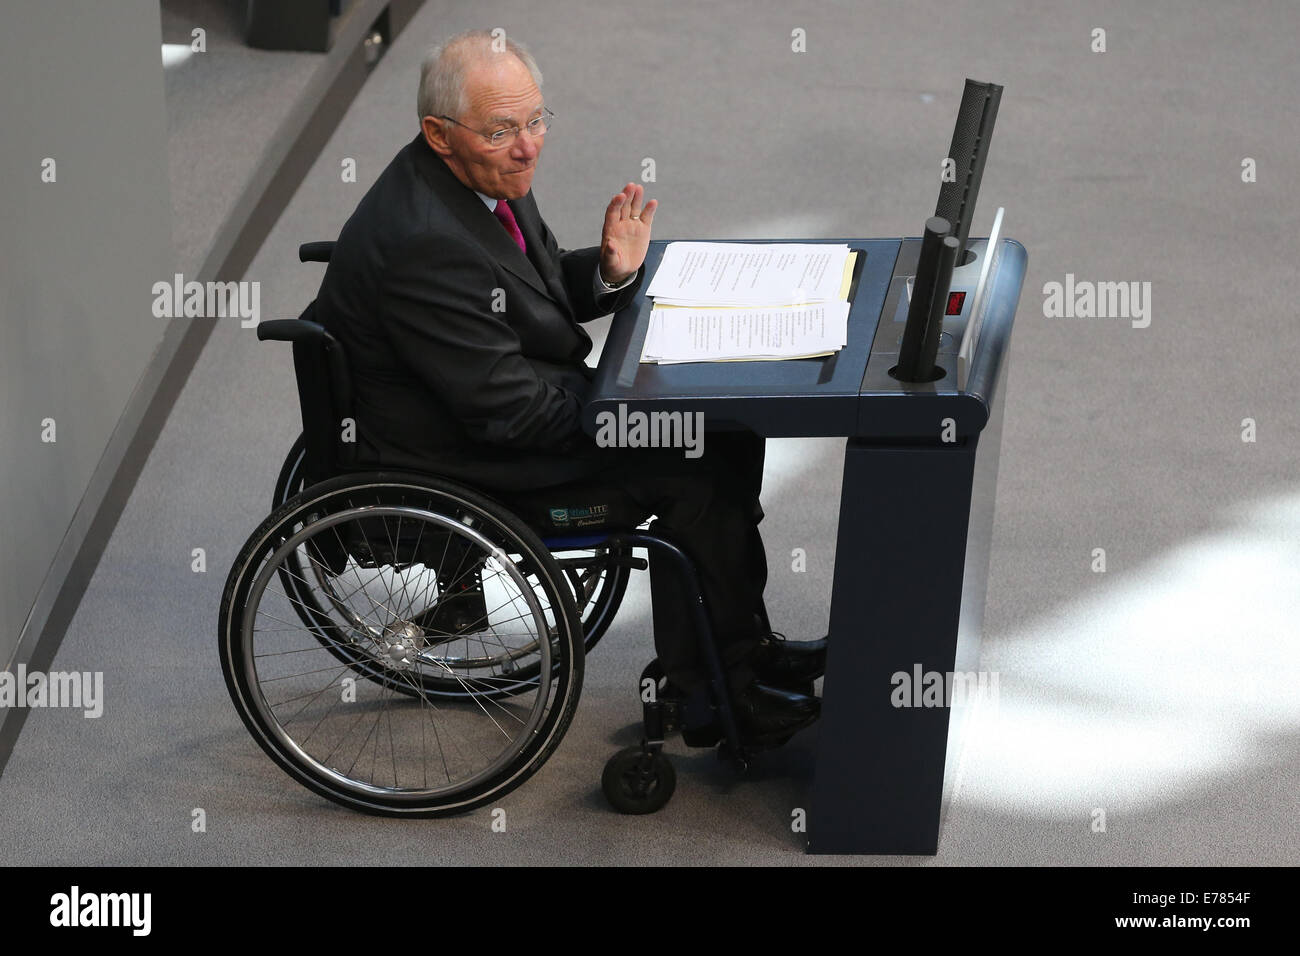 Berlin, Germany. 9th Sep, 2014. German Finance Minister Wolfgang Schaeuble speaks during a debate on the 2015 federal budget at the Bundestag, the lower house of parliament, in Berlin, Germany, on Sept. 9, 2014. Credit:  Zhang Fan/Xinhua/Alamy Live News Stock Photo